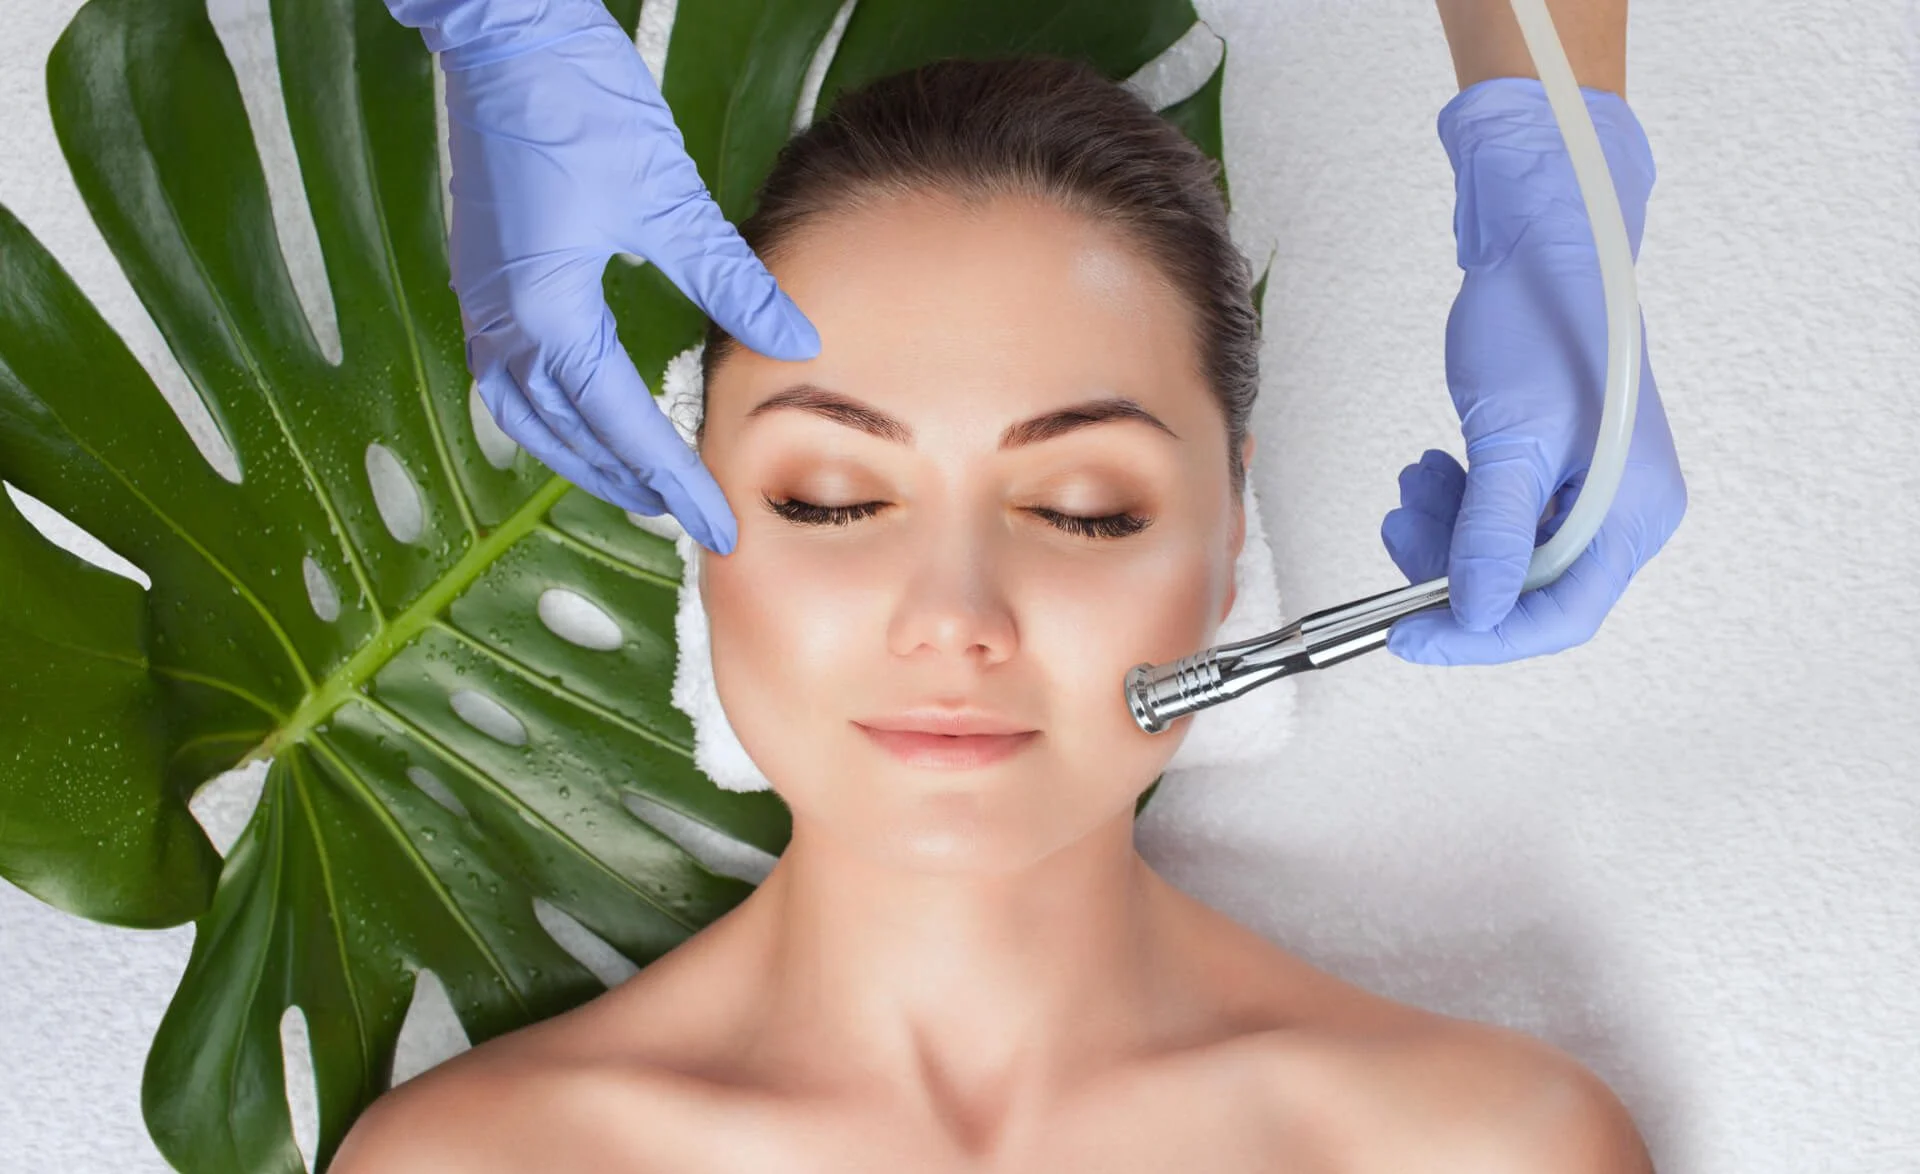 The cosmetologist makes the Microdermabrasion procedure of the facial skin of a woman